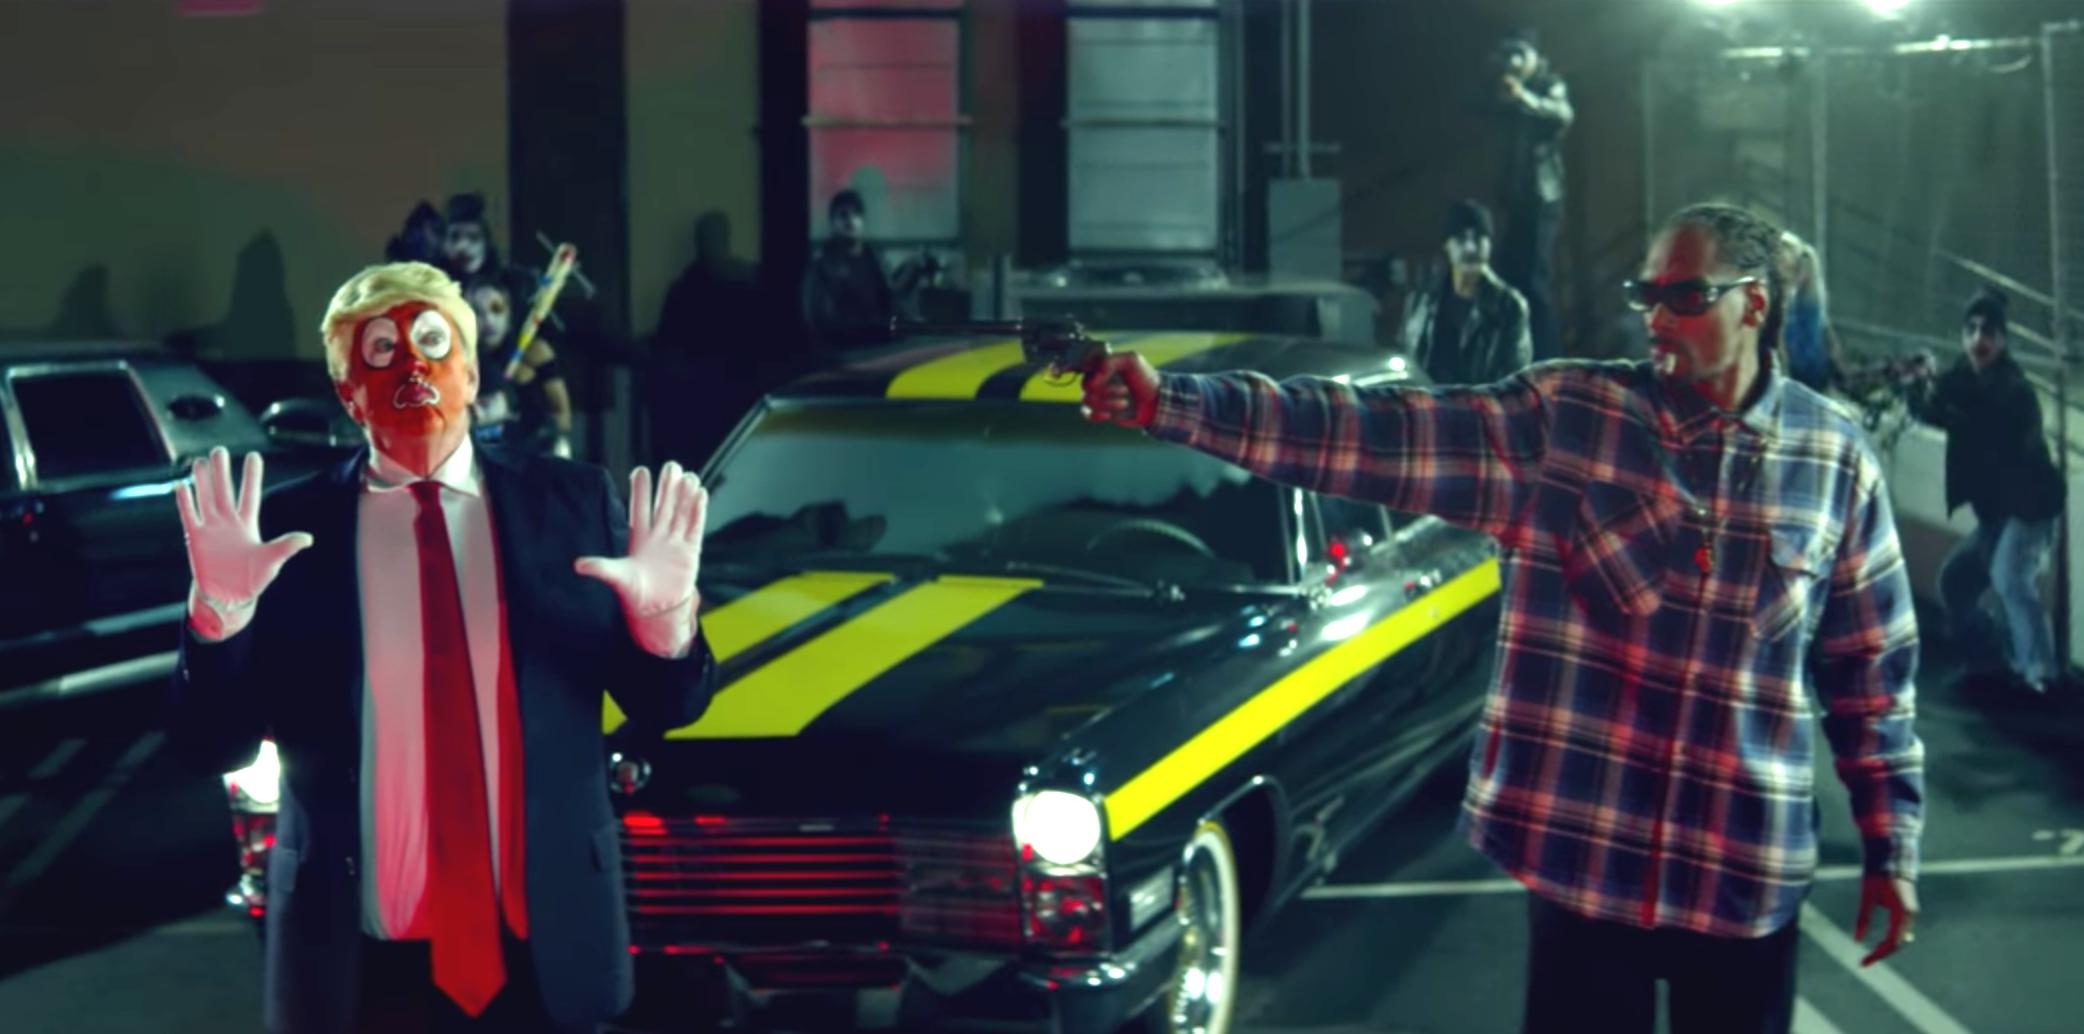 Snoop Dogg pulls gun on Donald Trump in 'Lavender' music video - The Independent